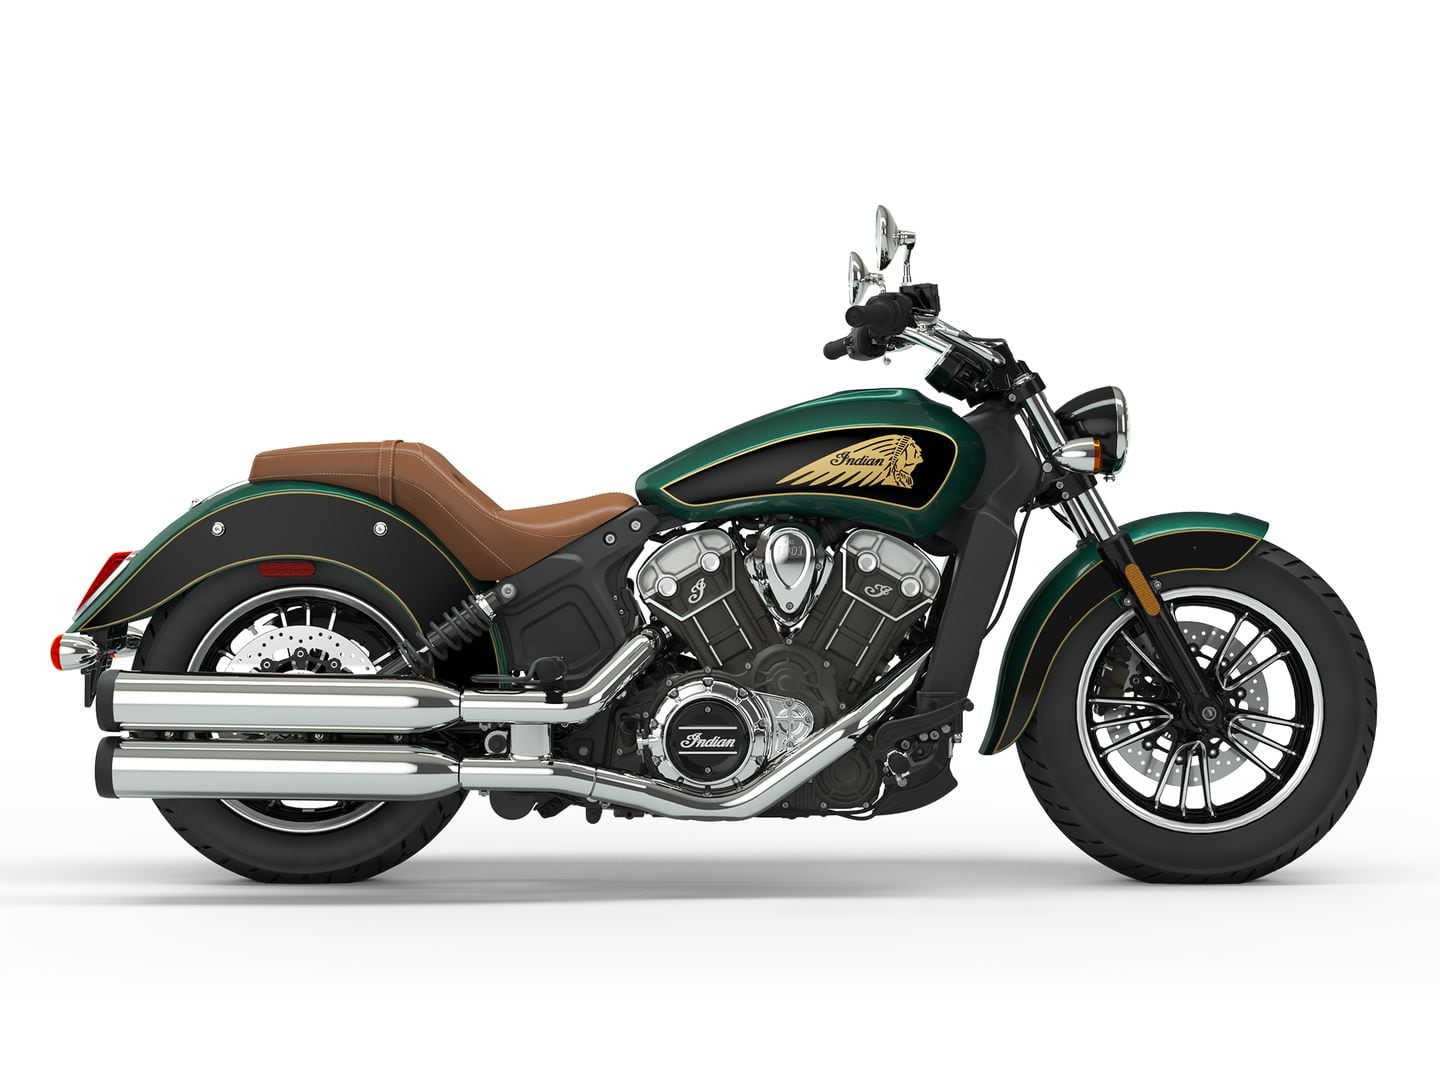 2020 Indian Scout Buyer's Guide Specs, Photos, Price Motorcycle Cruiser